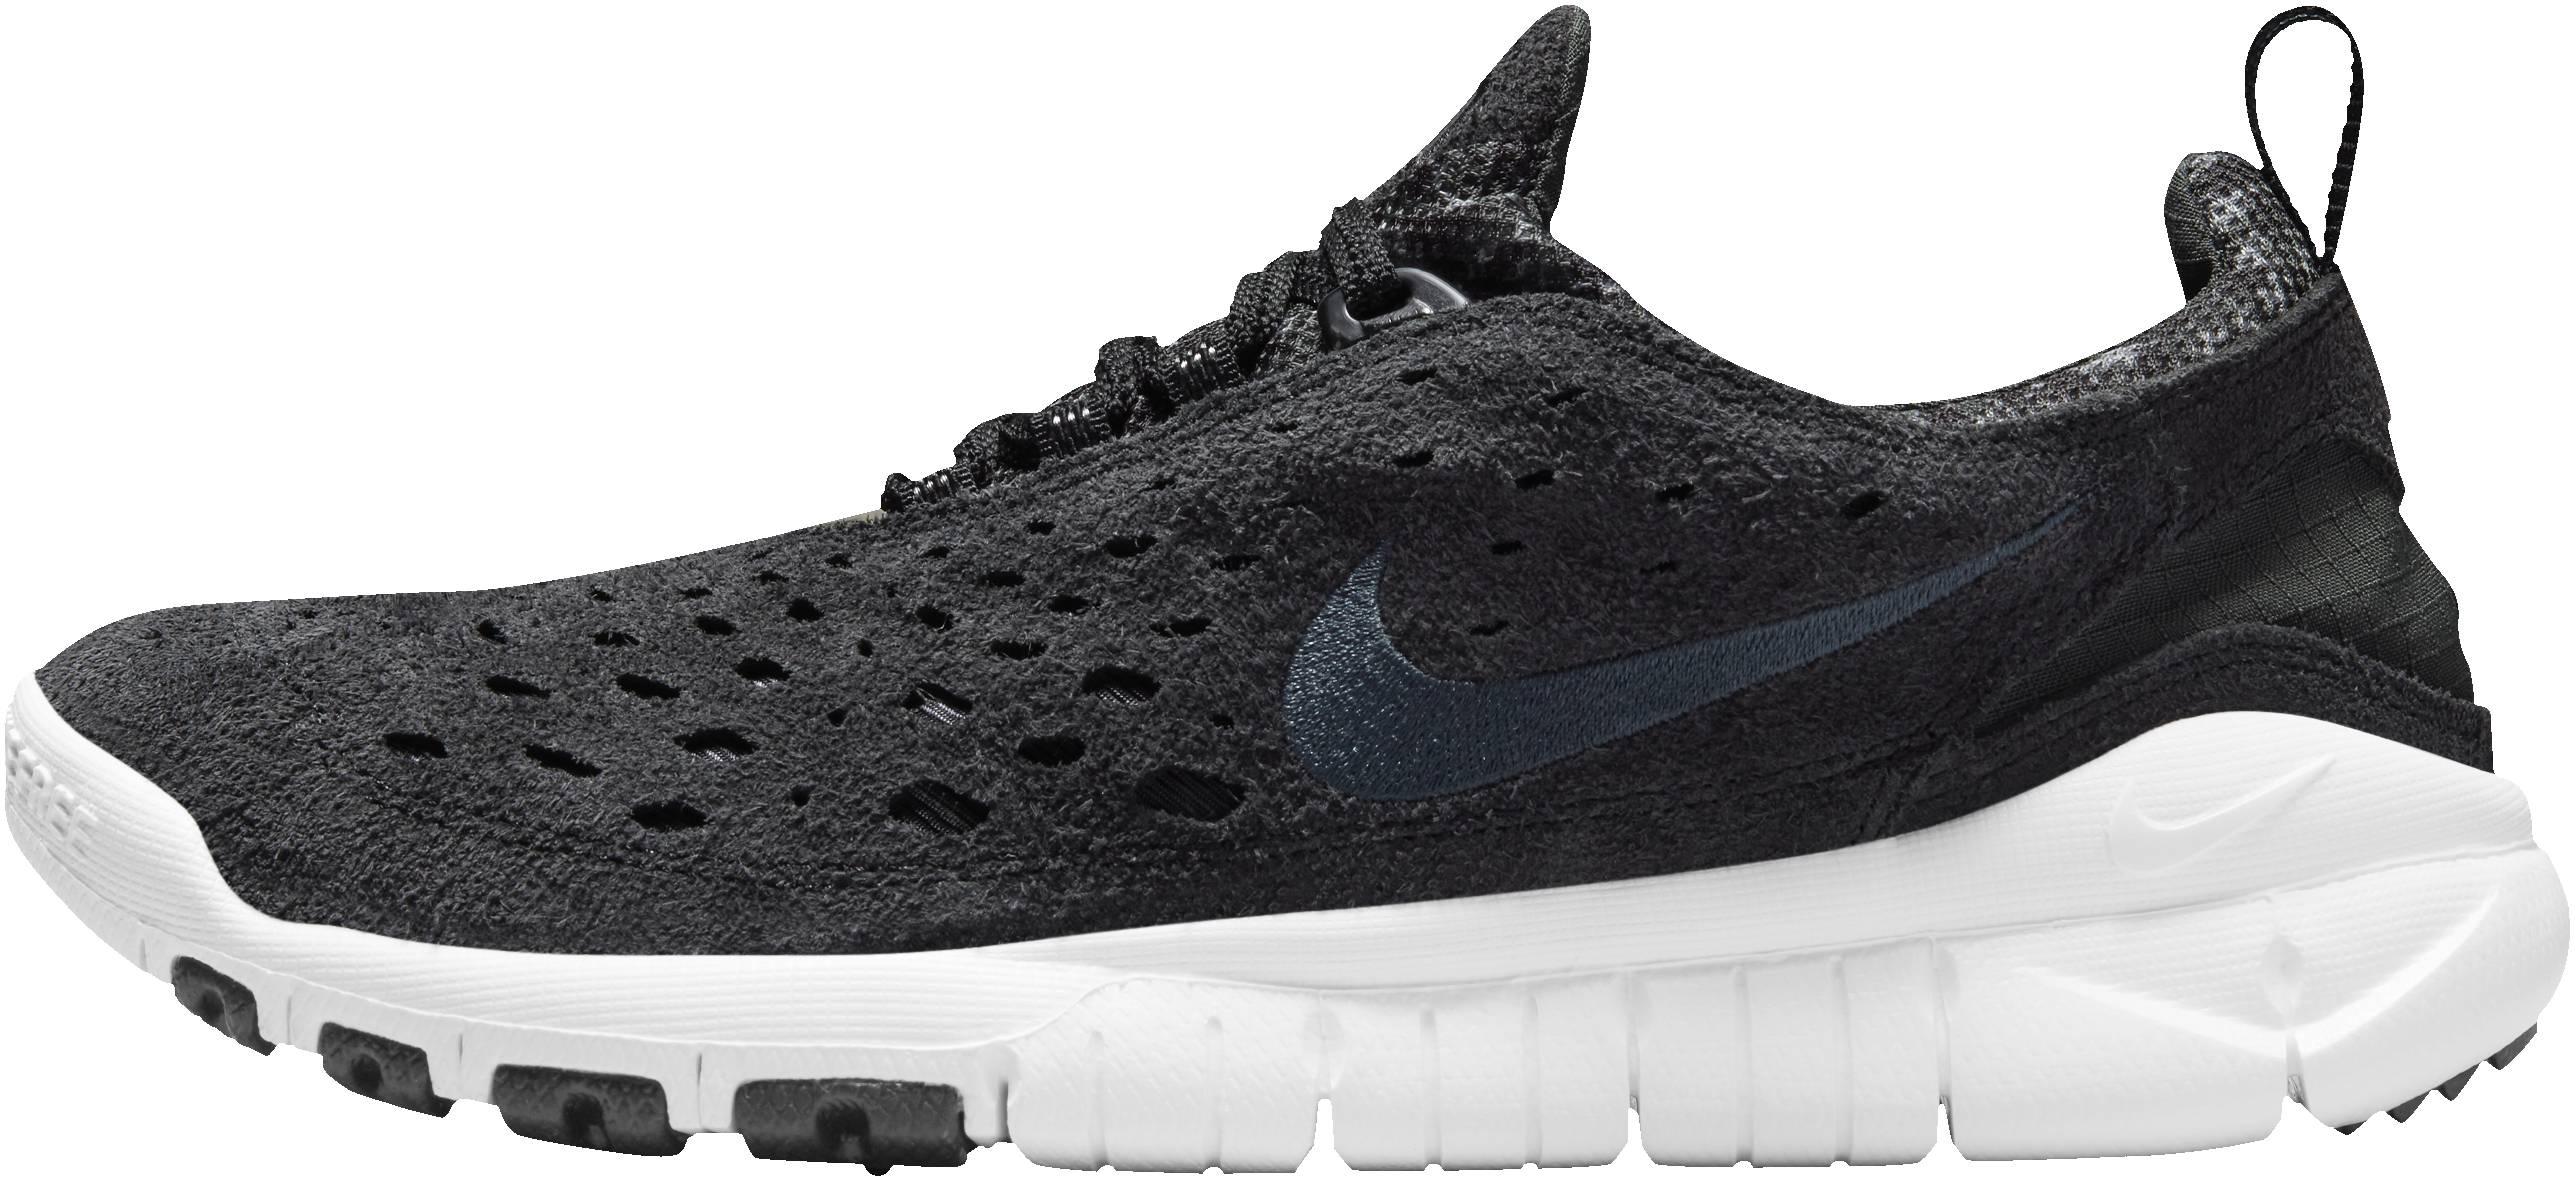 Nike Run Review, Facts, Comparison |